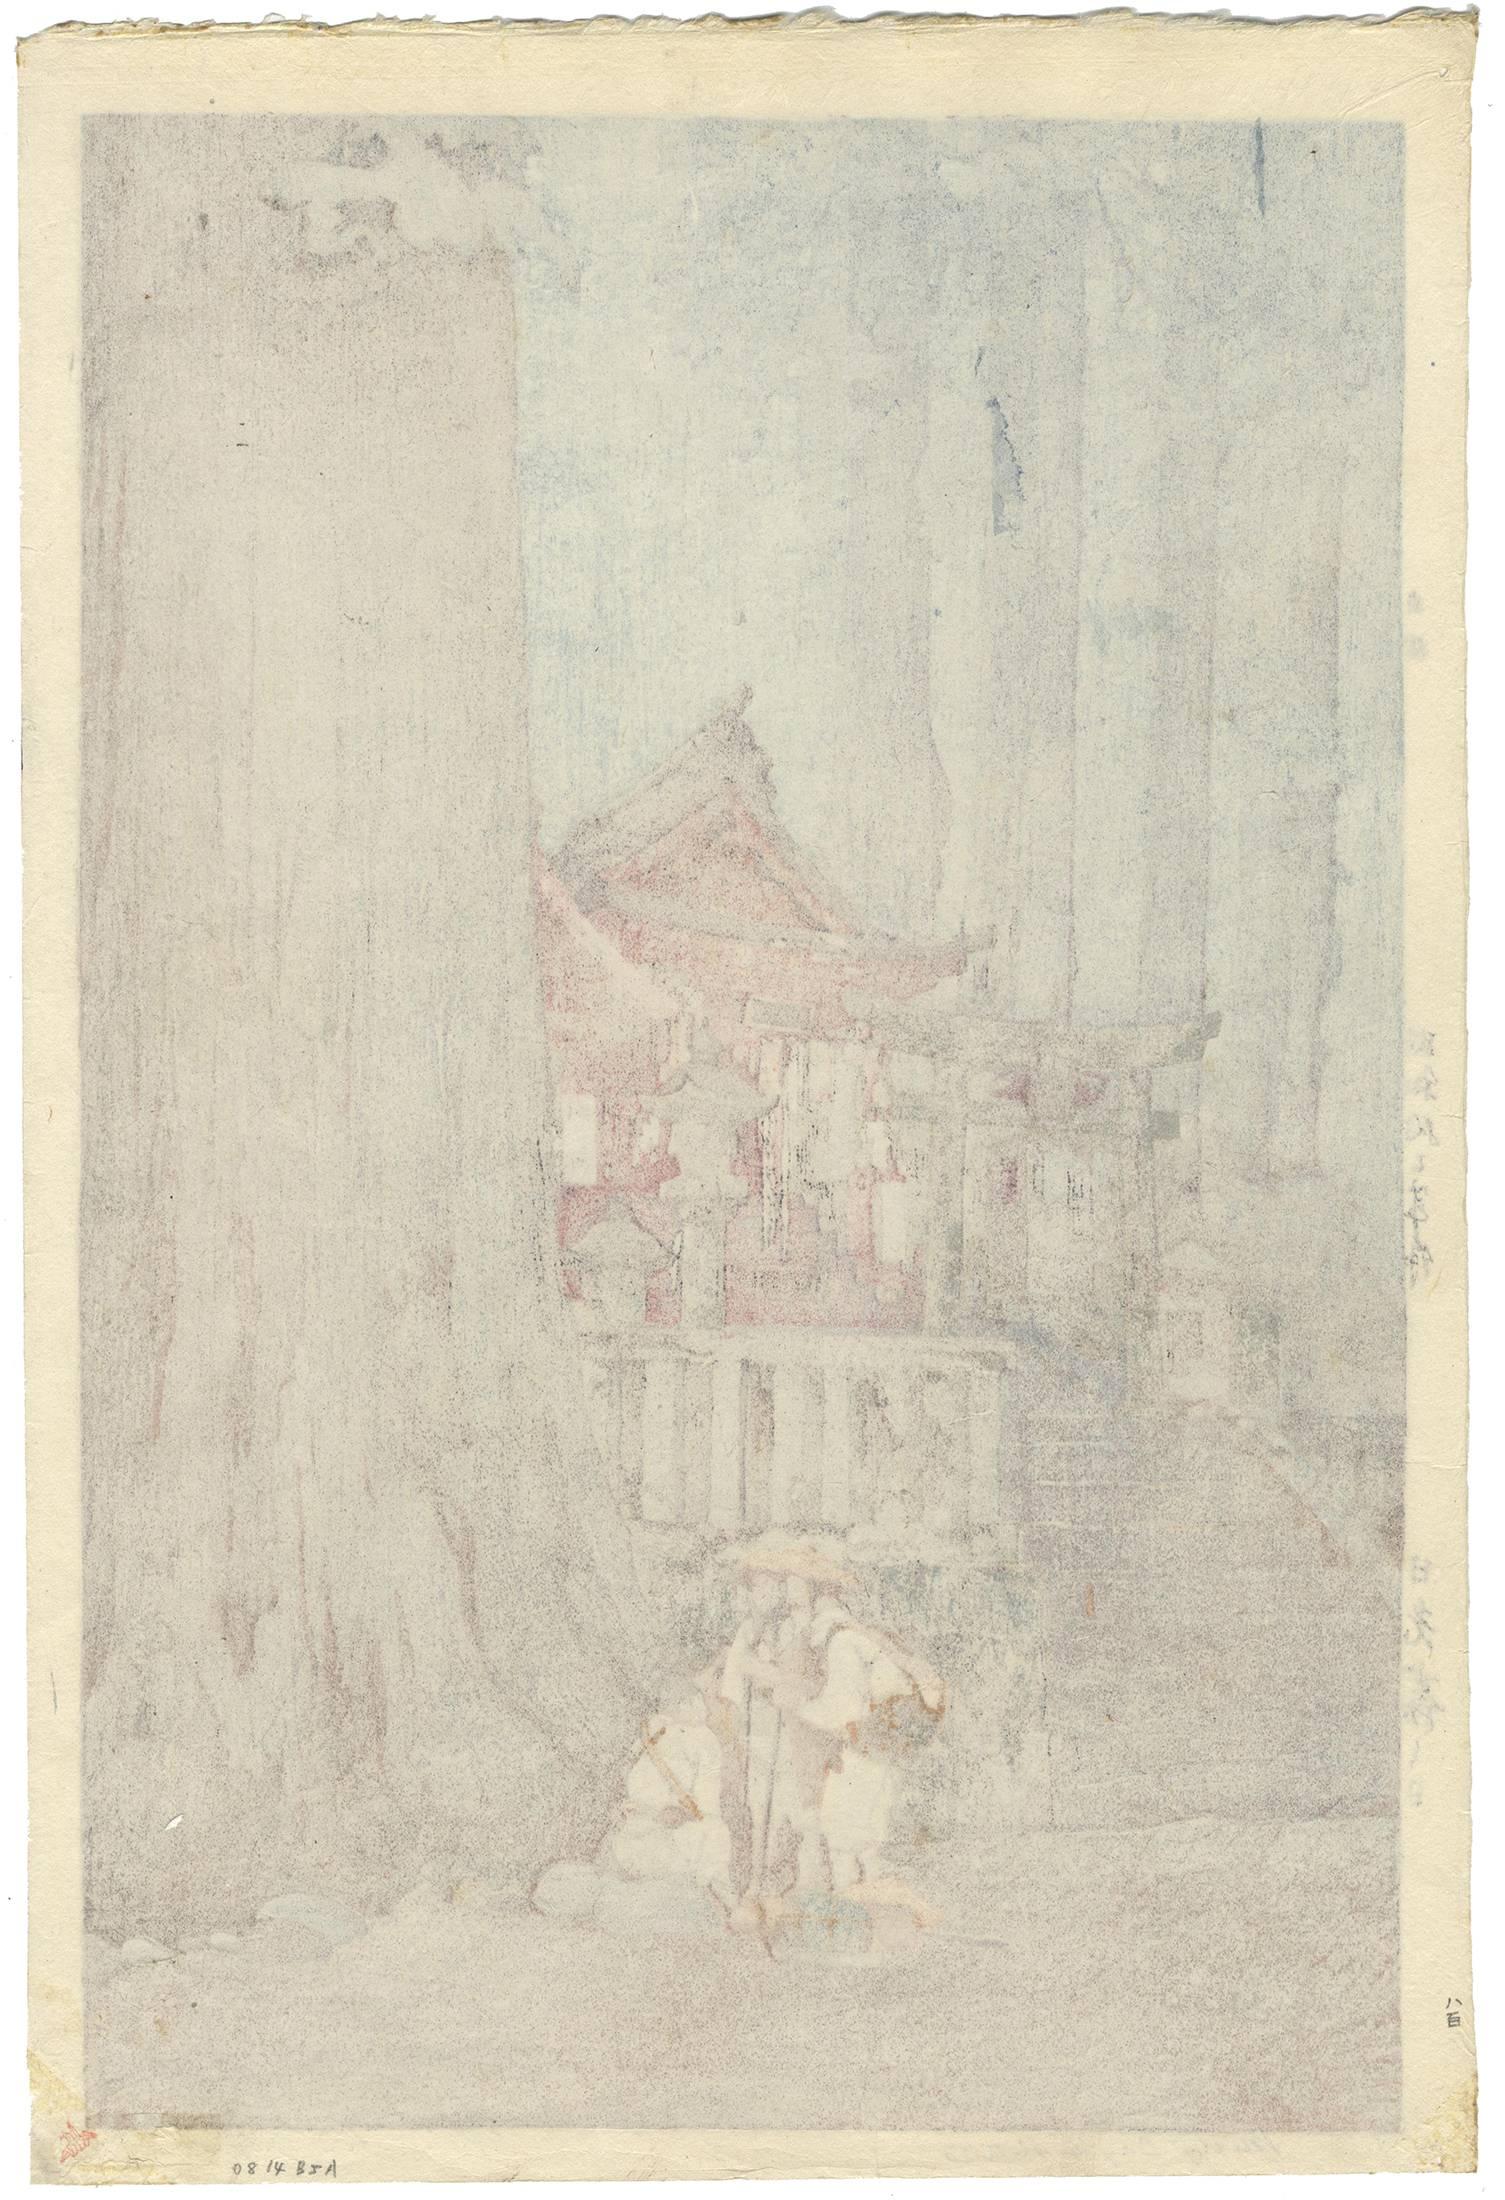 Title: Misty Day in Nikko
Artist: Hiroshi Yoshida
Self-published and signed by the artist in 1937
Hand-printed on Japanese washi paper.

Nikko is a town in Tochigi prefecture and is located at the entrance of the Nikko National Park. It boasts